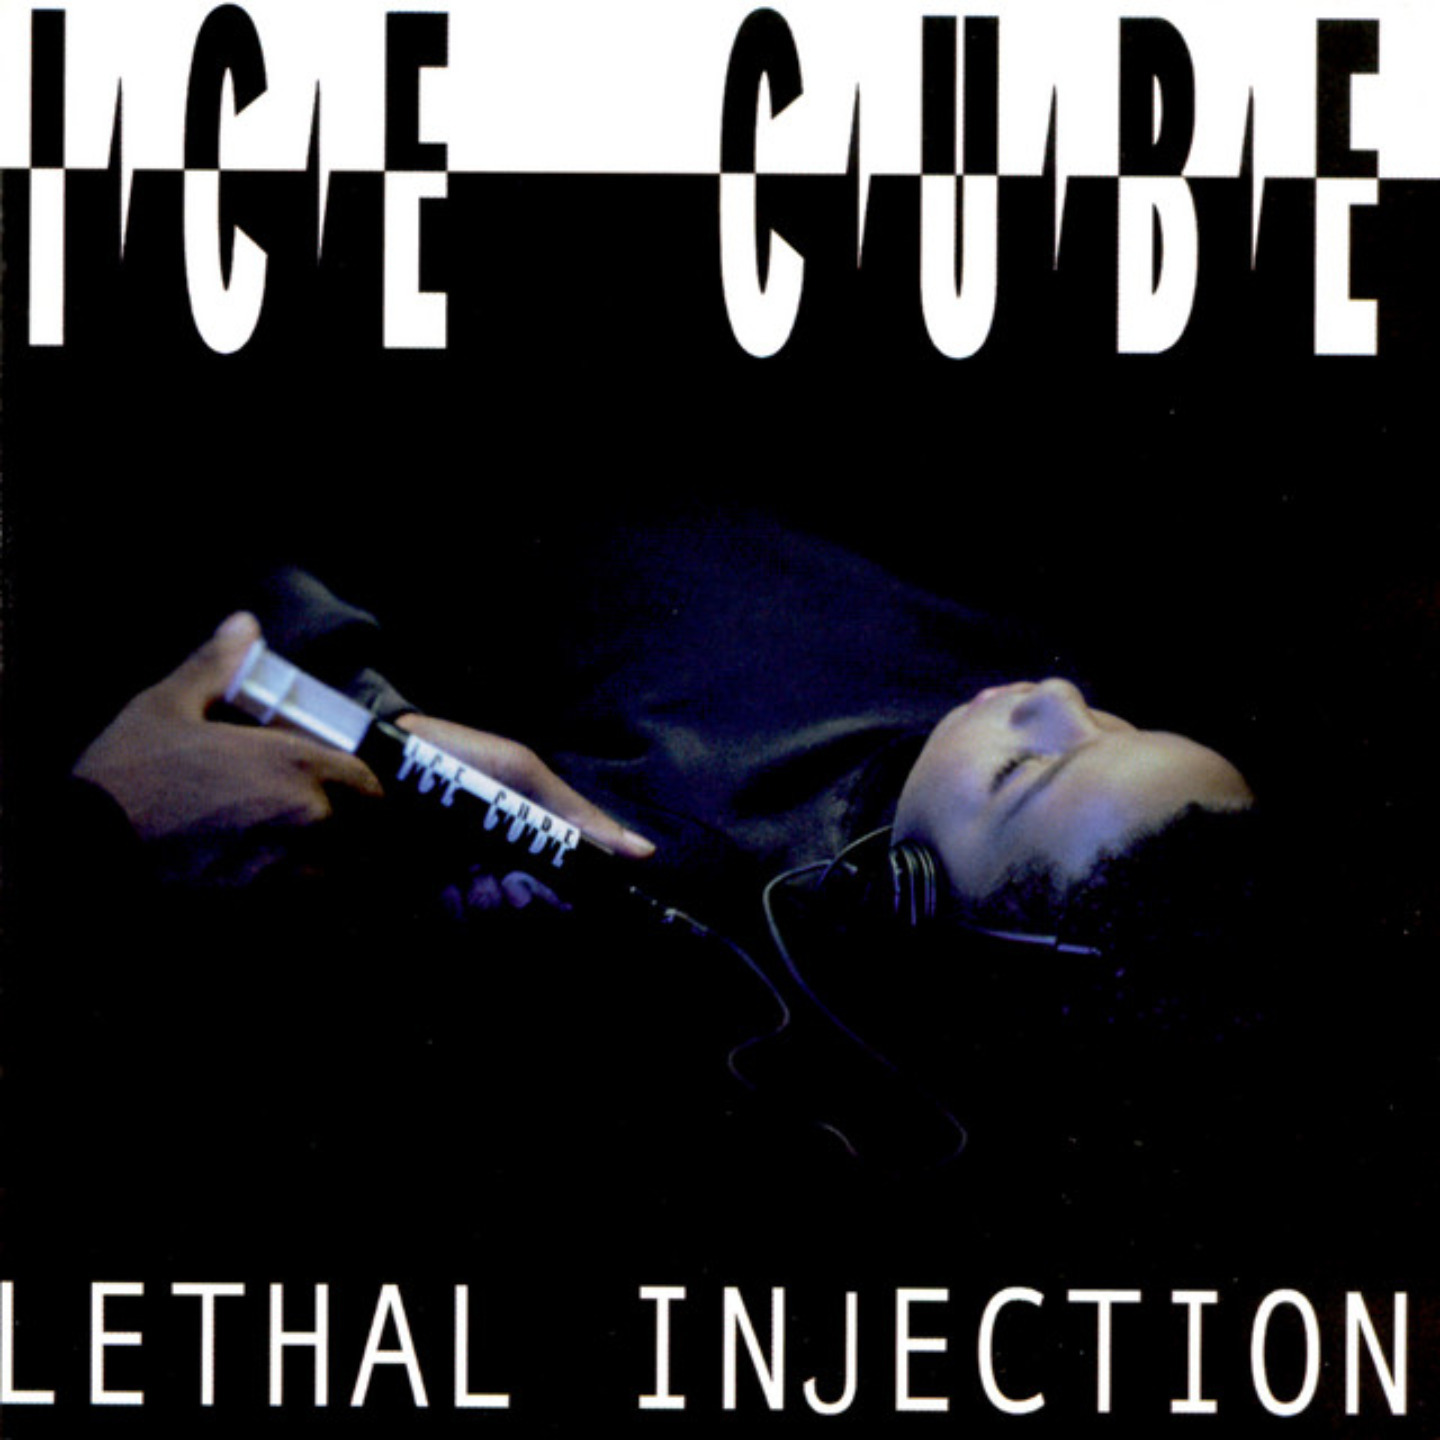 ICE CUBE - Lethal Injection LP